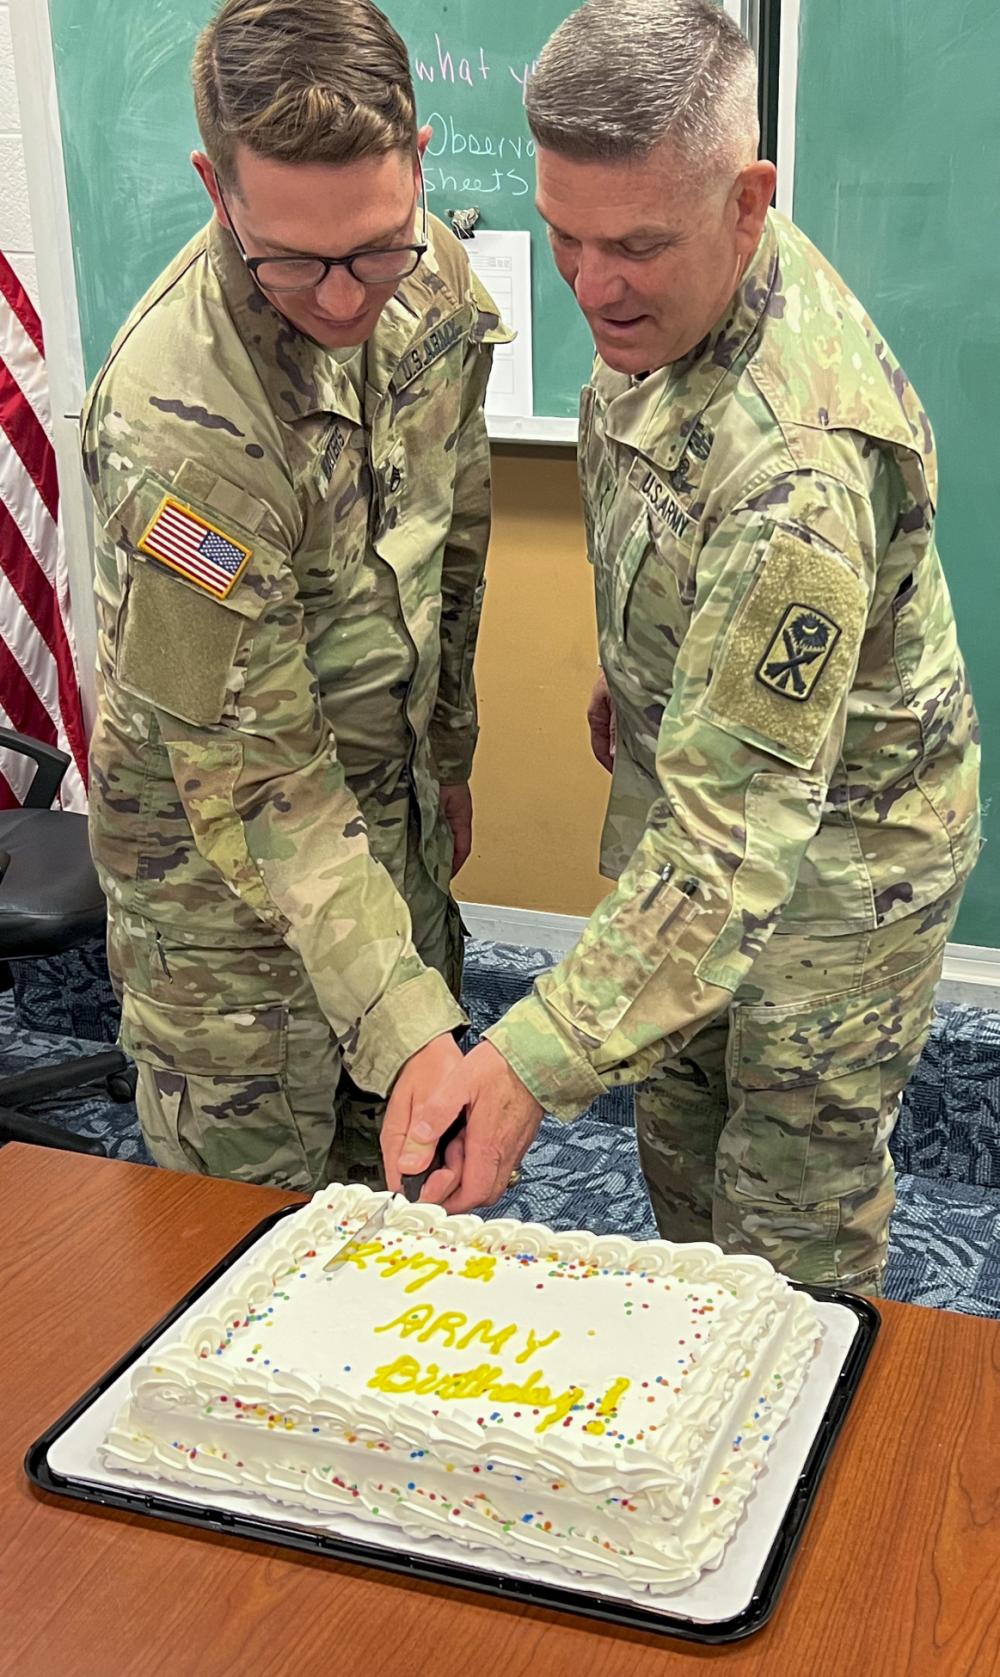 263rd Army Air and Missile Defense Command recognizes the U.S. Army’s 247th birthday